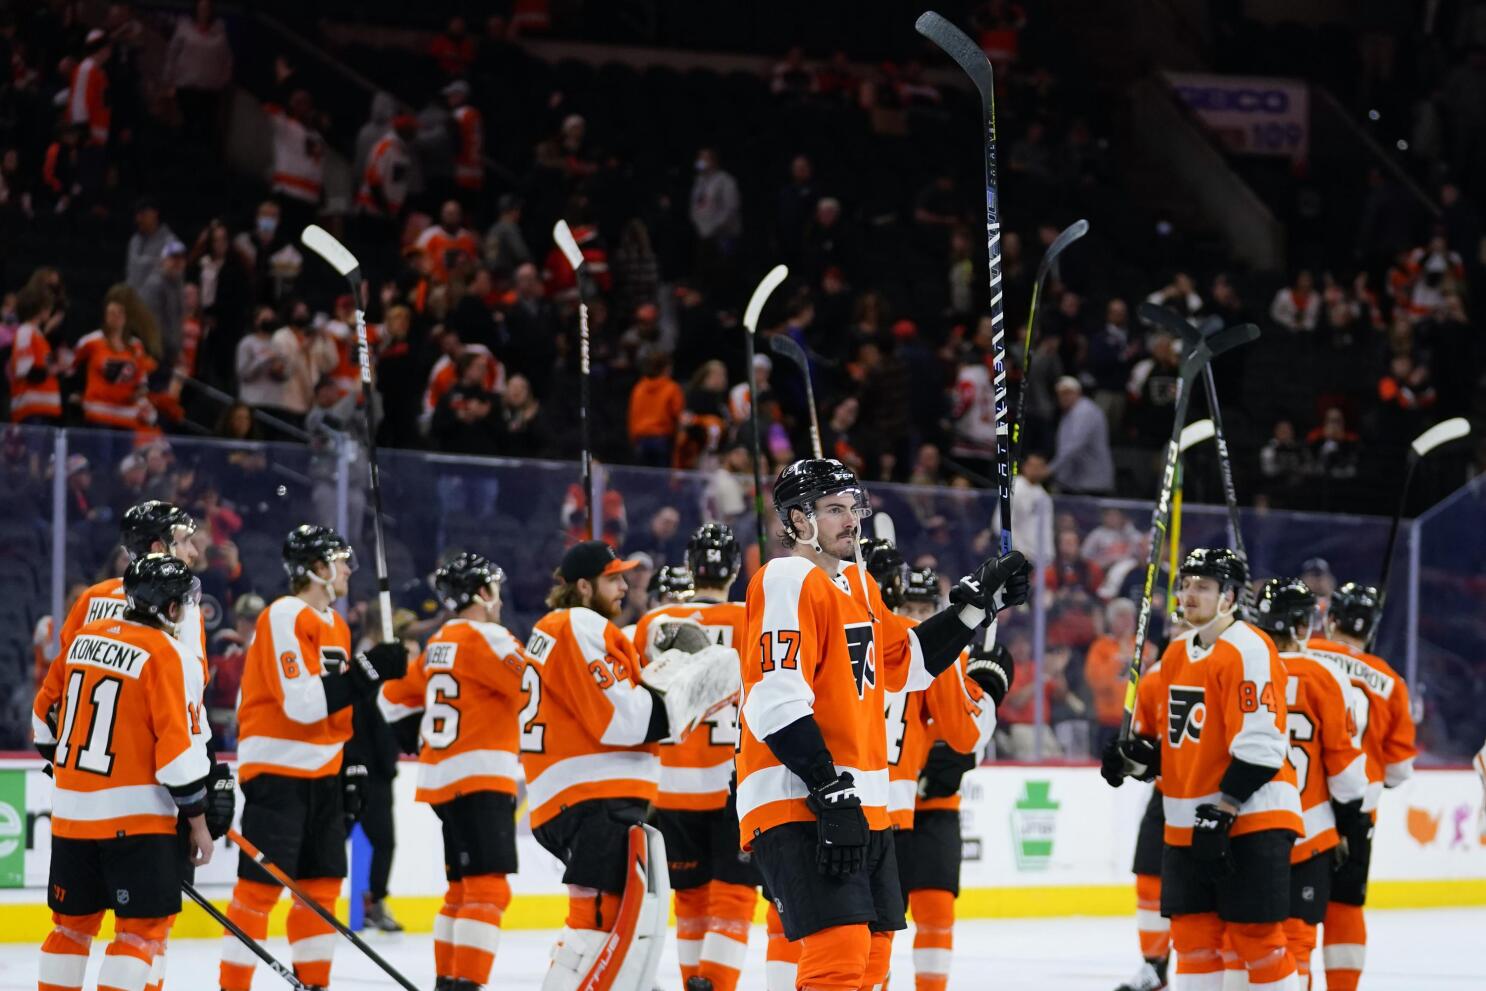 At long last, Flyers fans return to the Wells Fargo Center